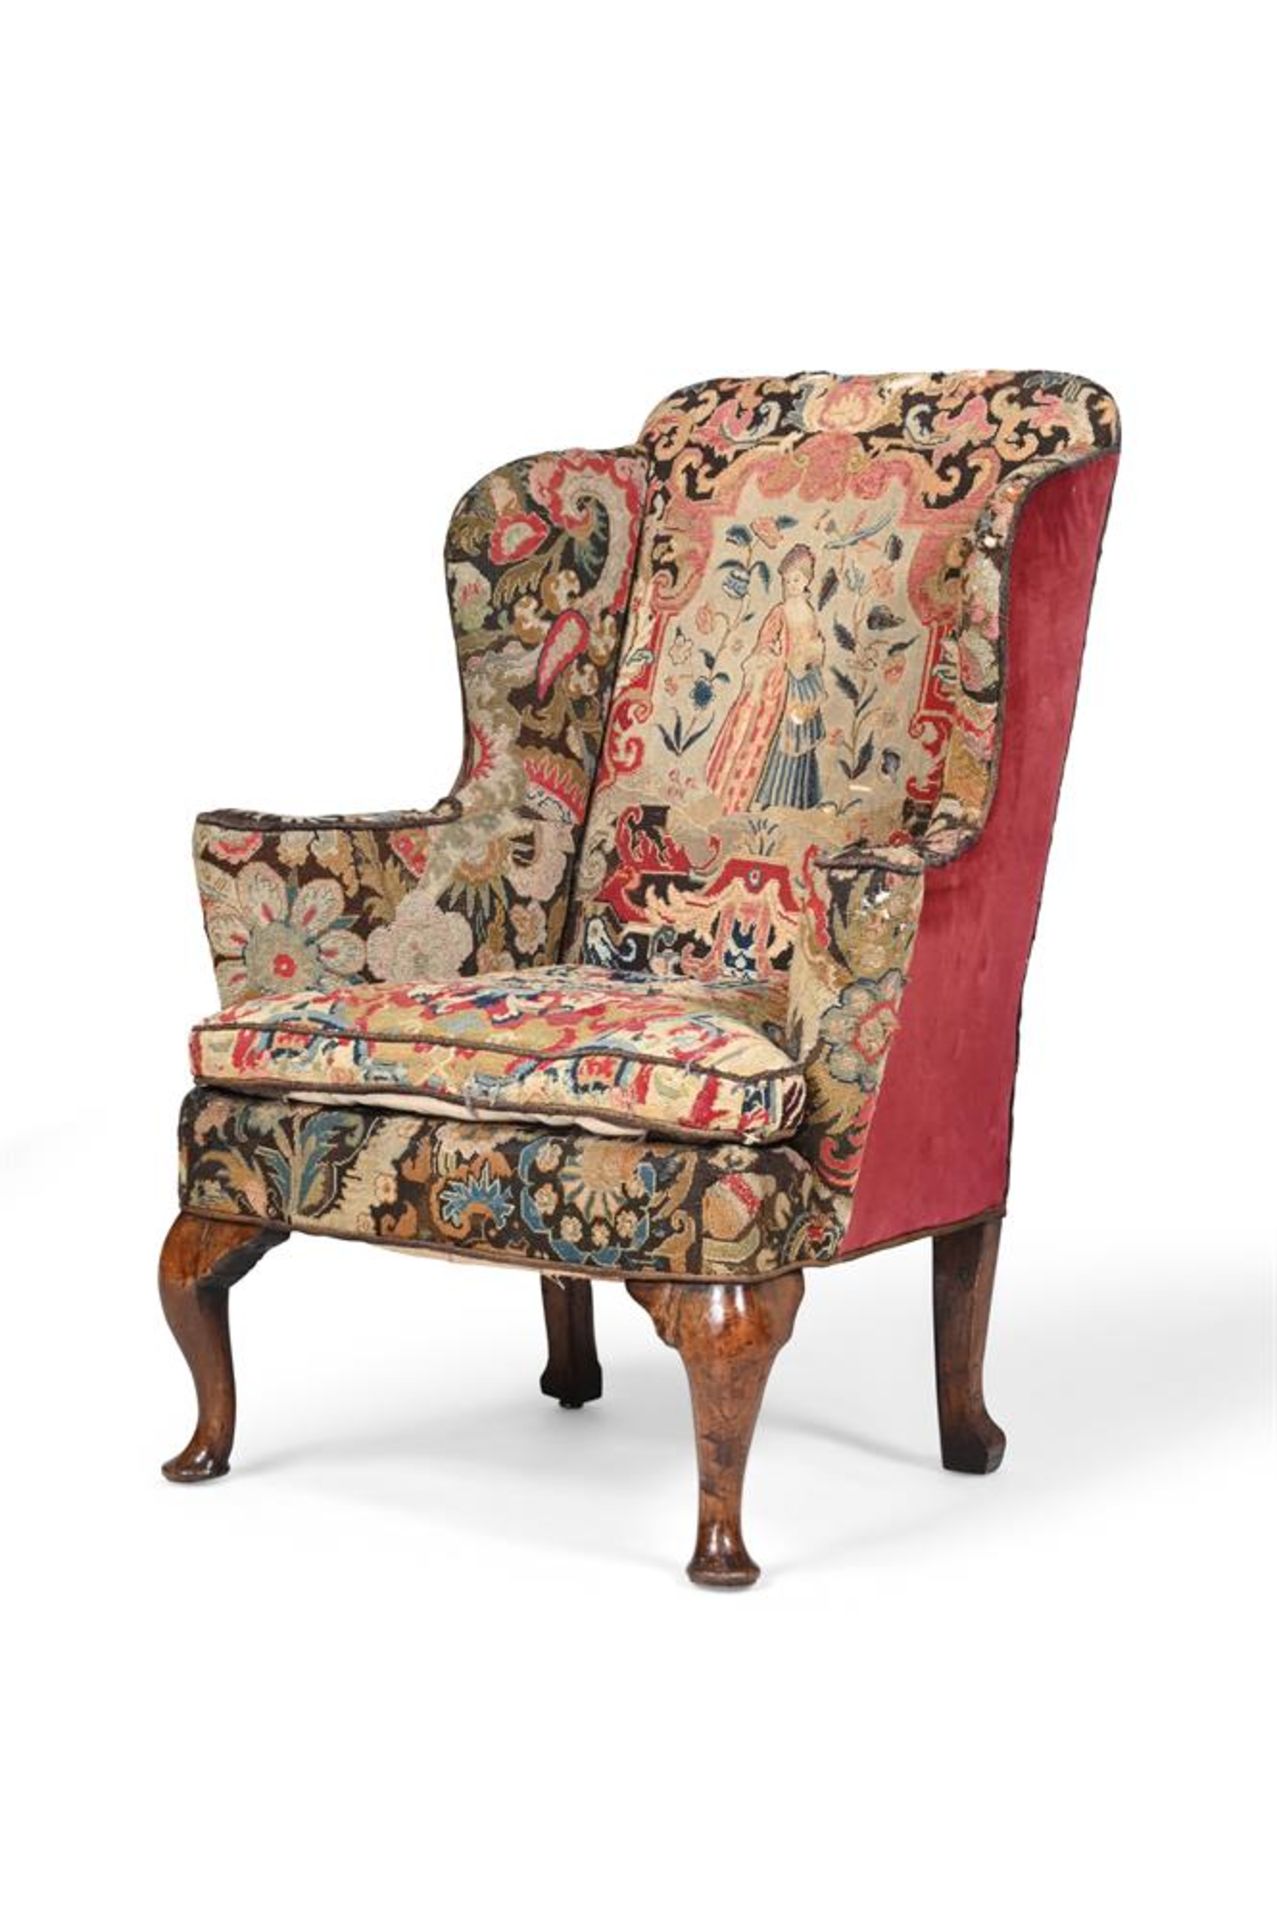 A WALNUT AND NEEDLEWORK UPHOLSTERED WING ARMCHAIR - Image 2 of 4